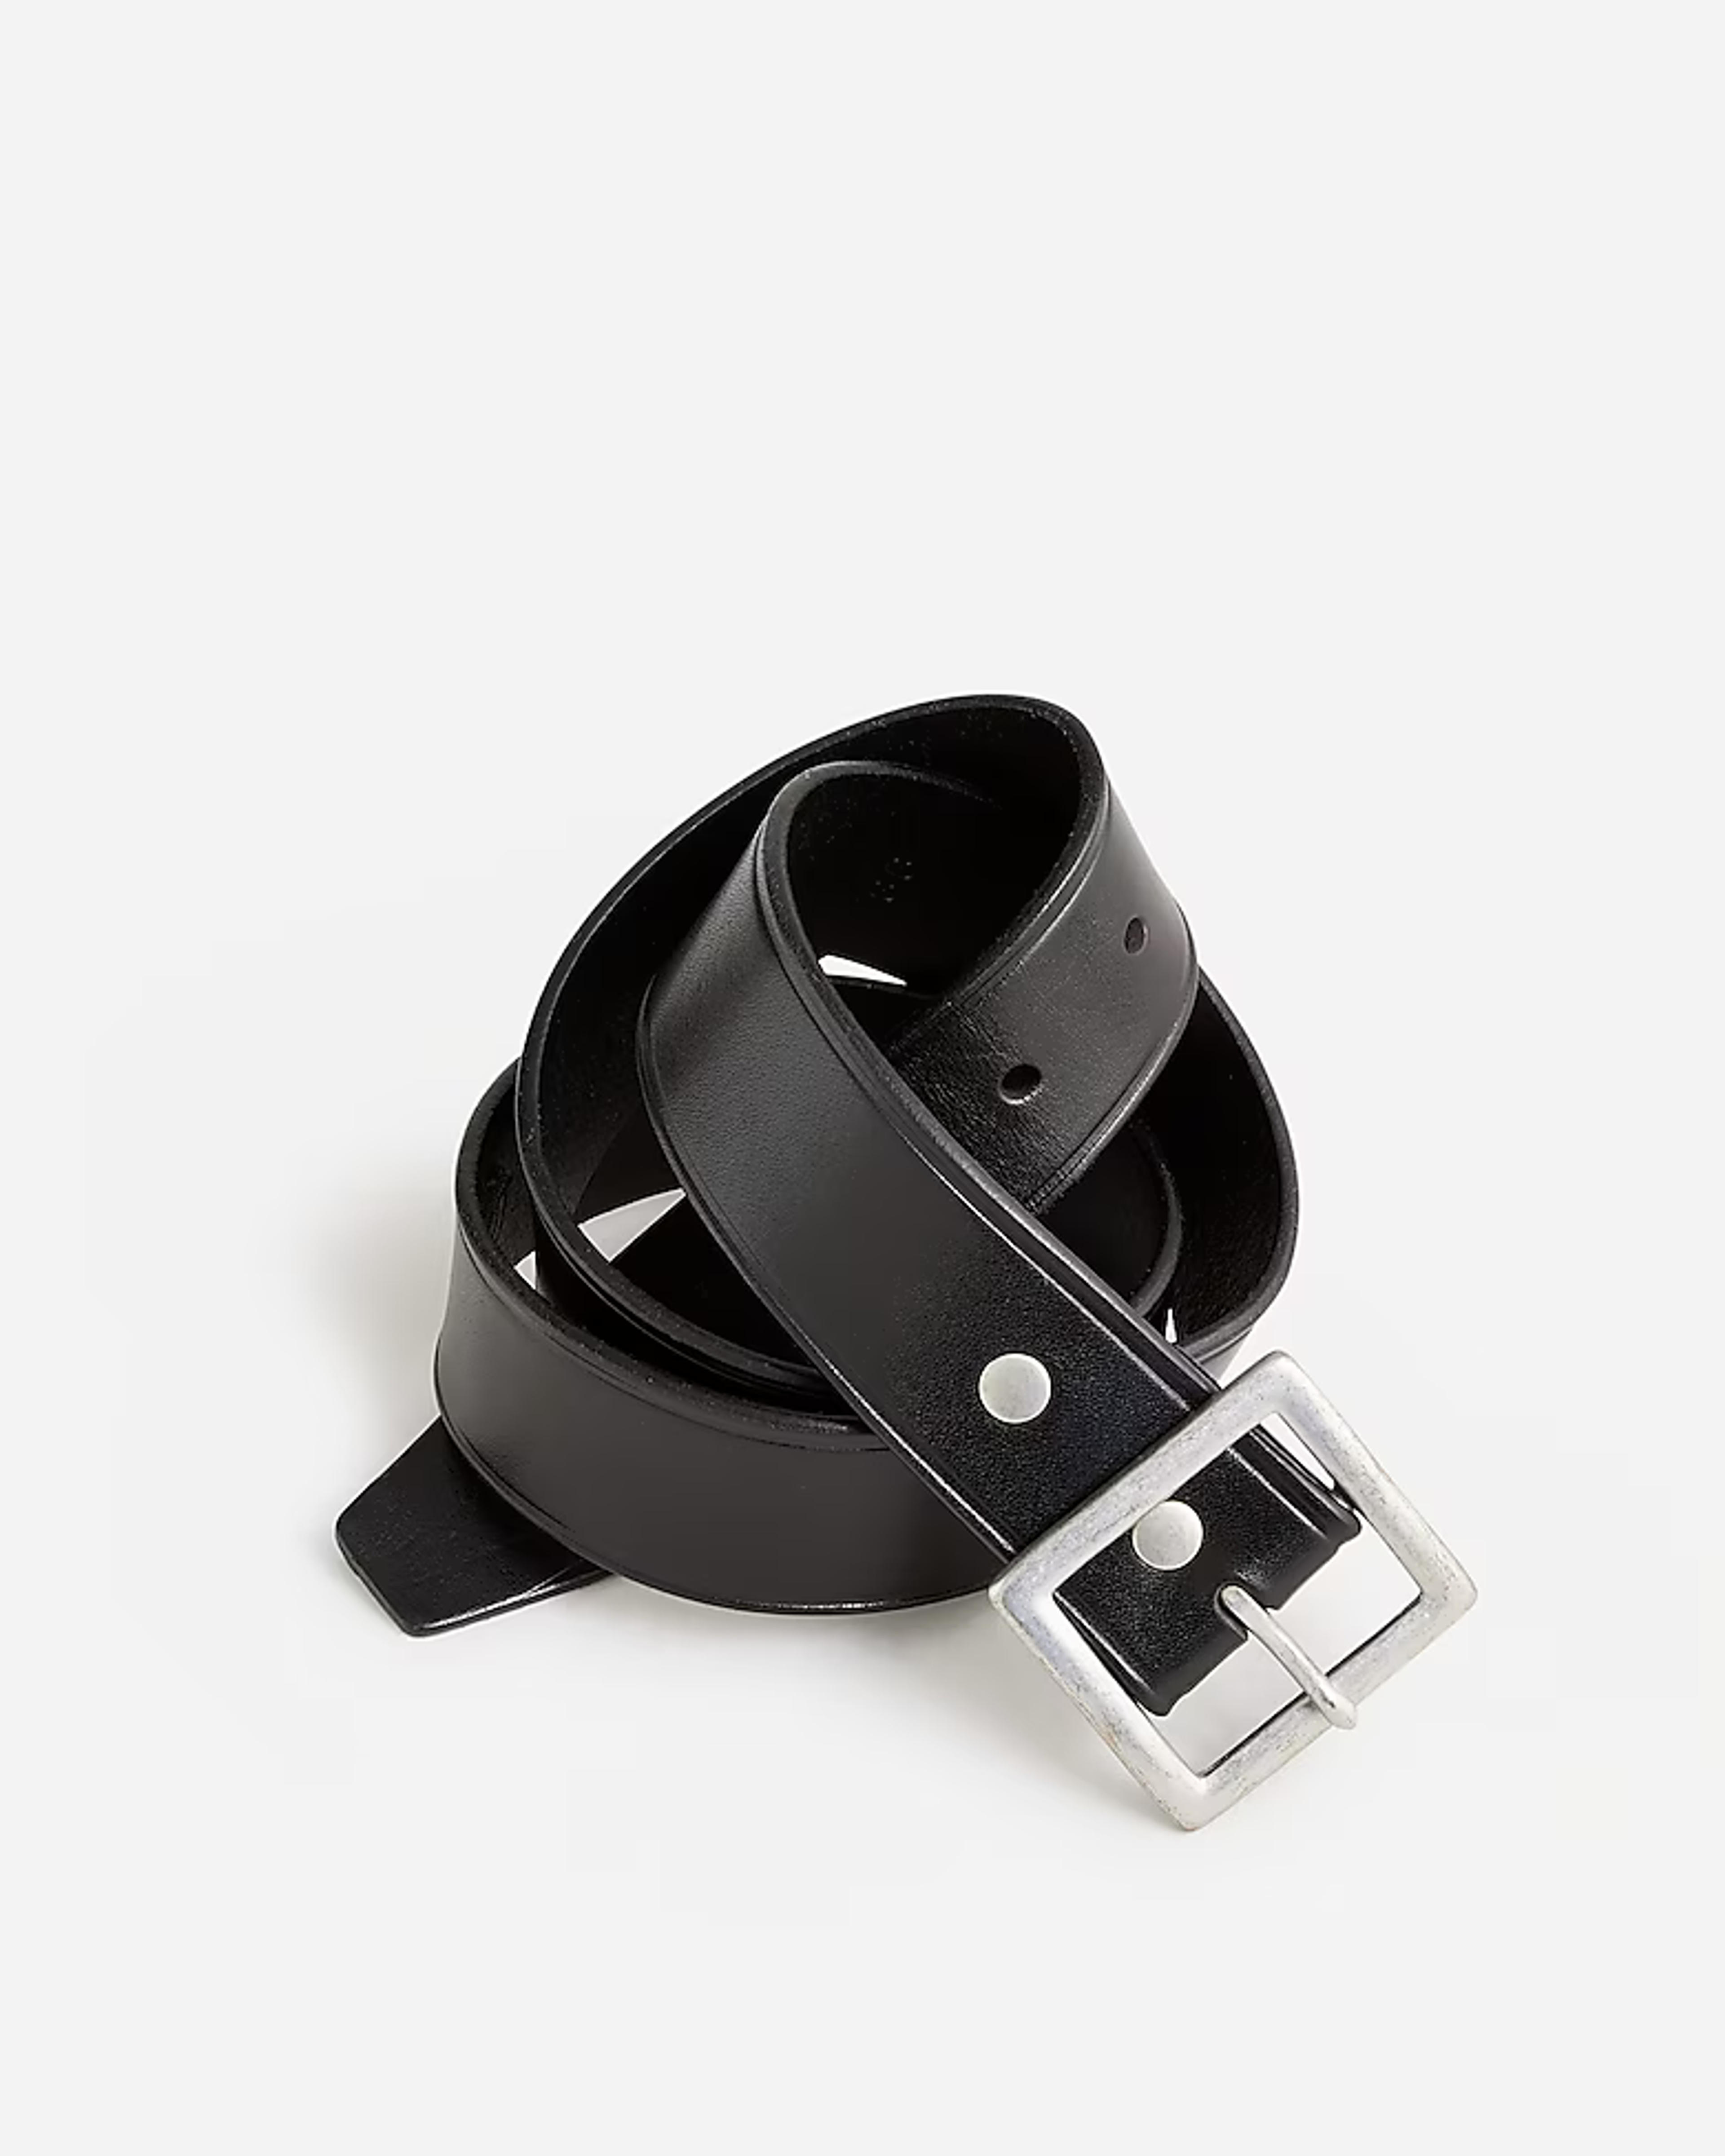 J.Crew: Wallace & Barnes Italian Leather Belt With Square Brass Buckle For Men